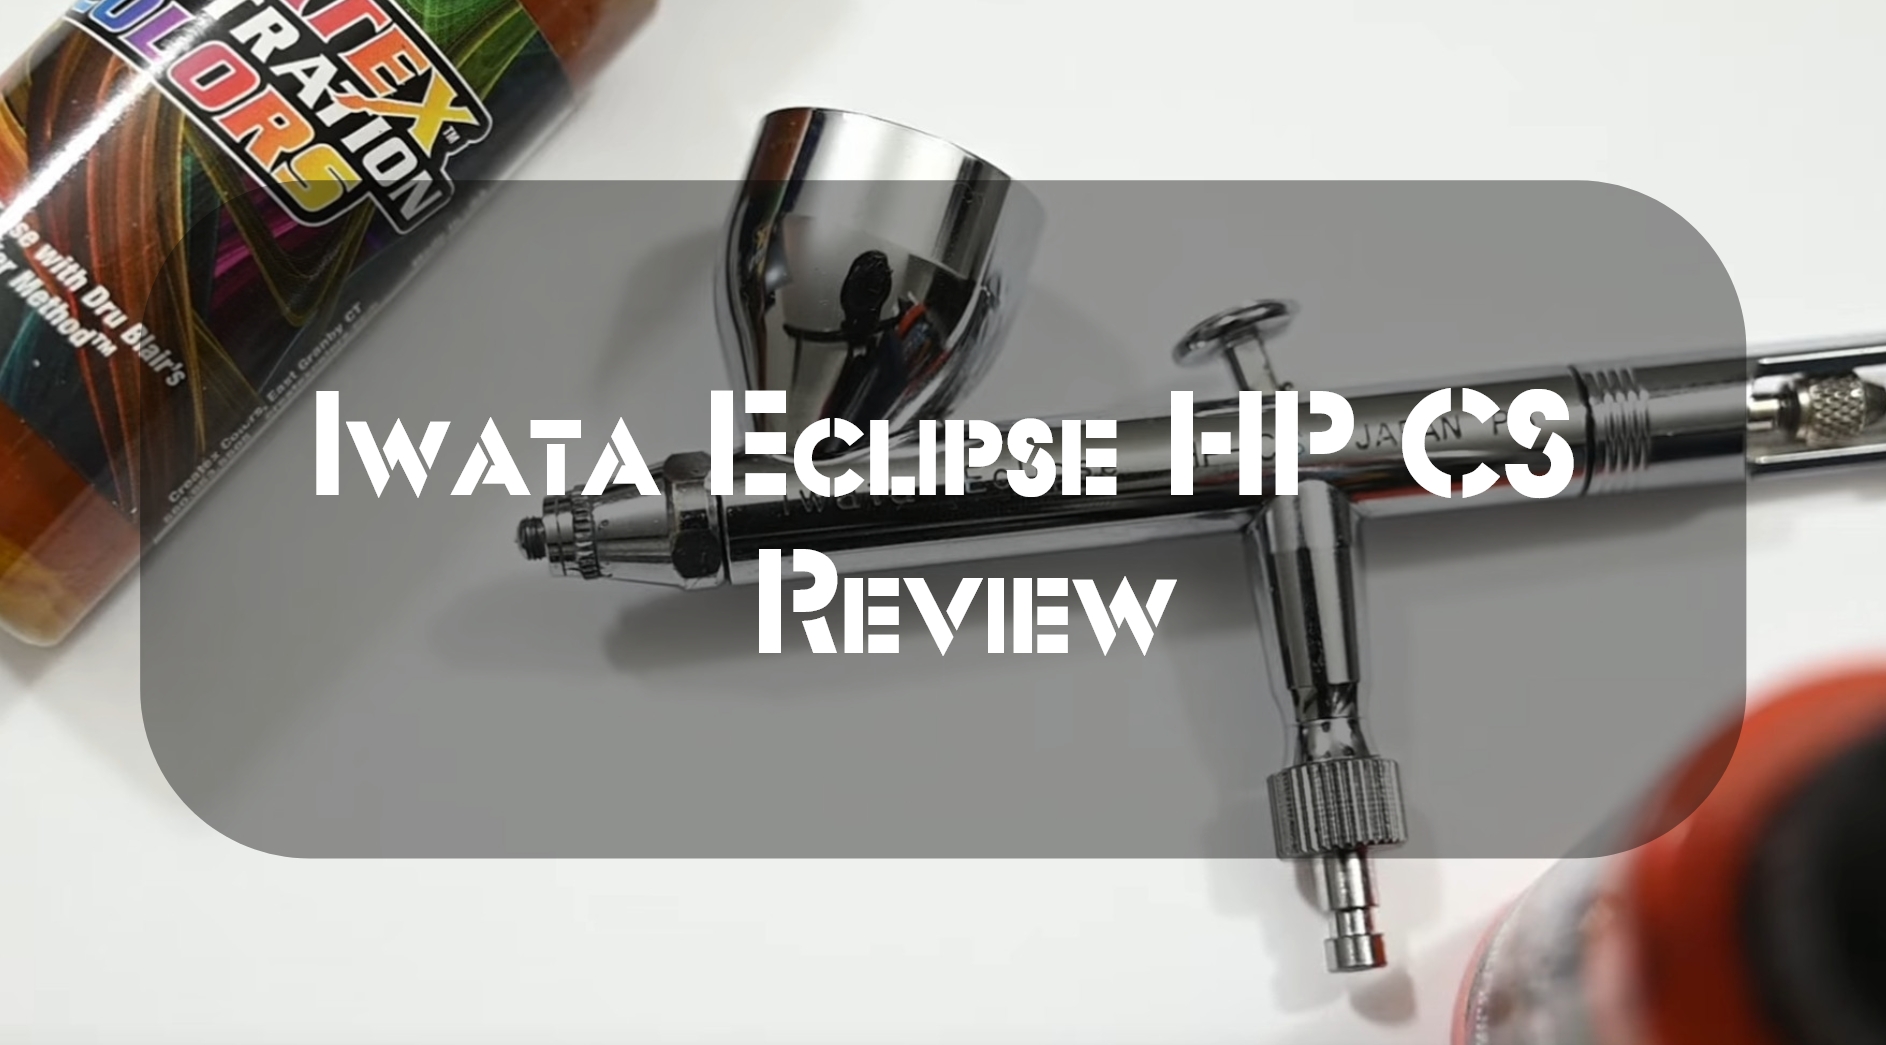 Our Expert Review of the Iwata Eclipse HP CS: Your Lifetime Airbrush